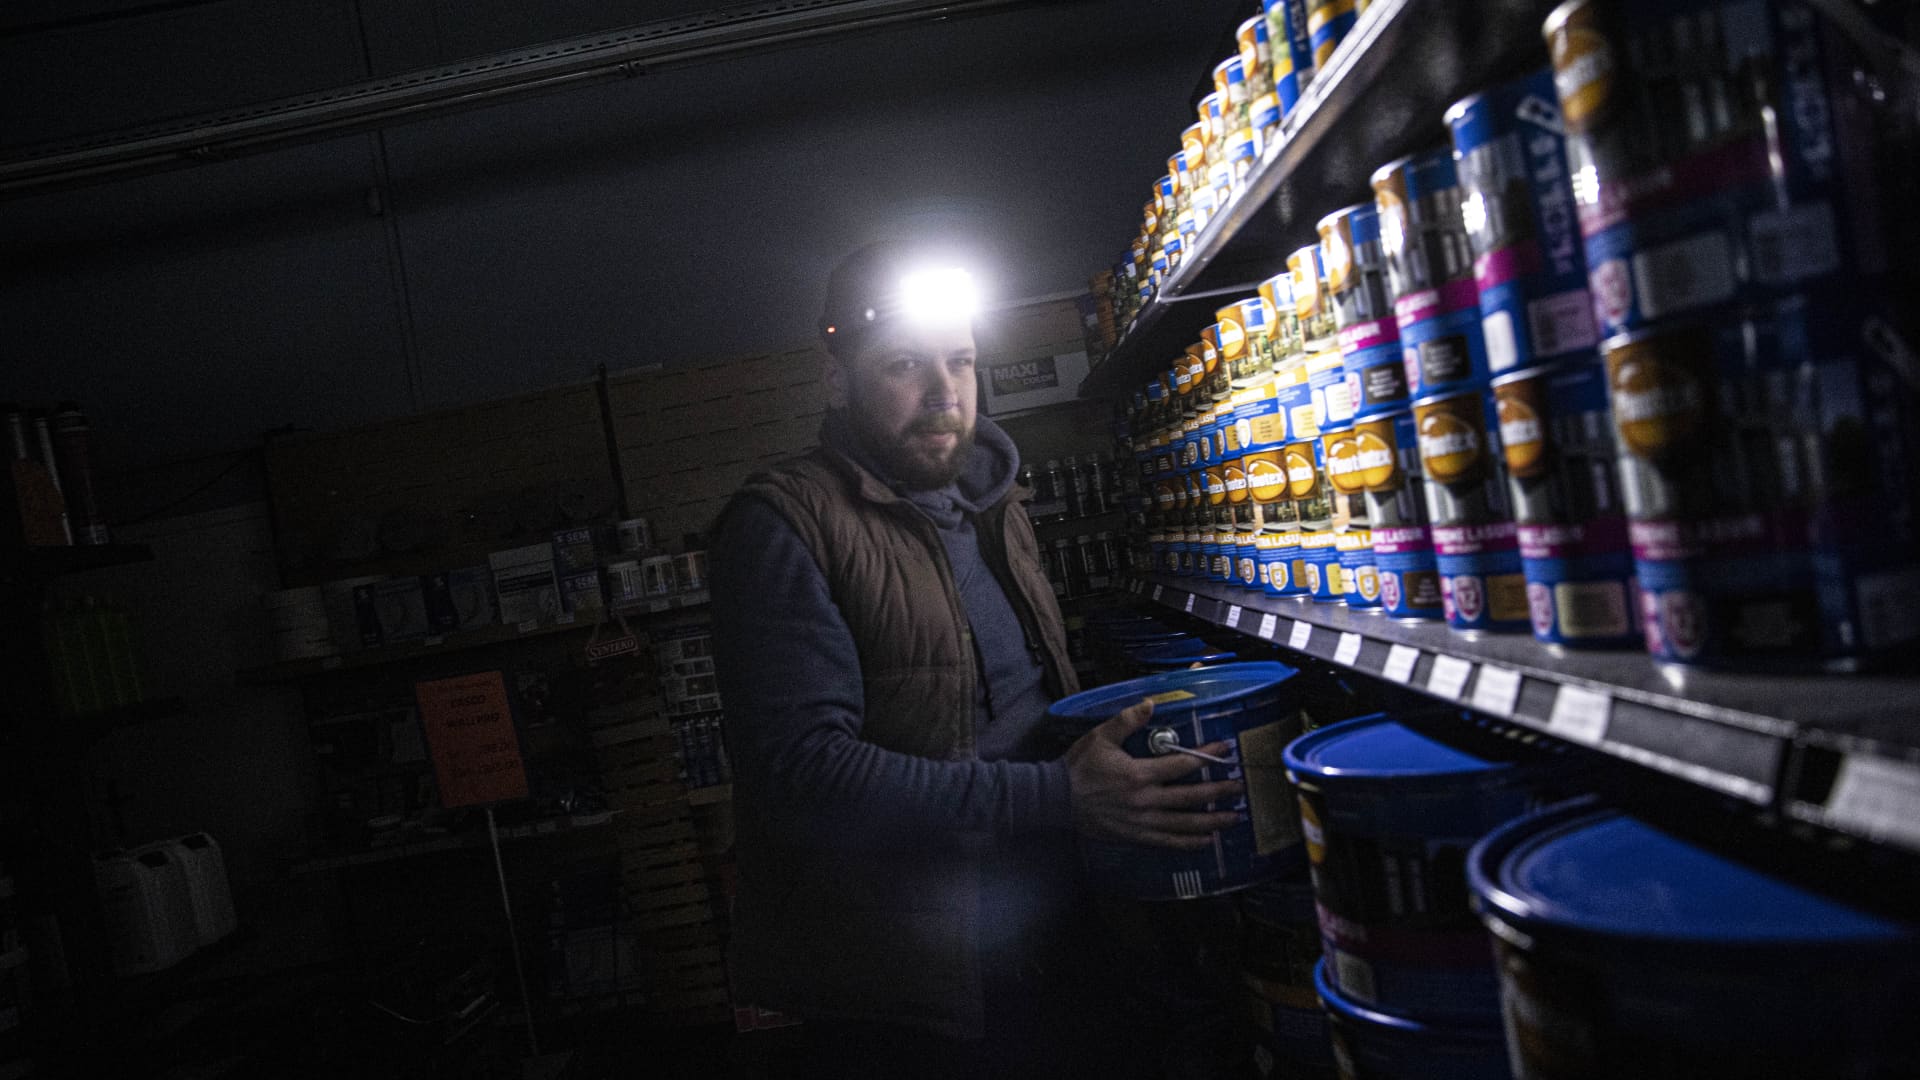 Oleg Bistrov, a Ukrainian salesman of a company that sells construction paint, works in the warehouse with a headlight during a power outage in Kyiv, Ukraine on November 21, 2022.